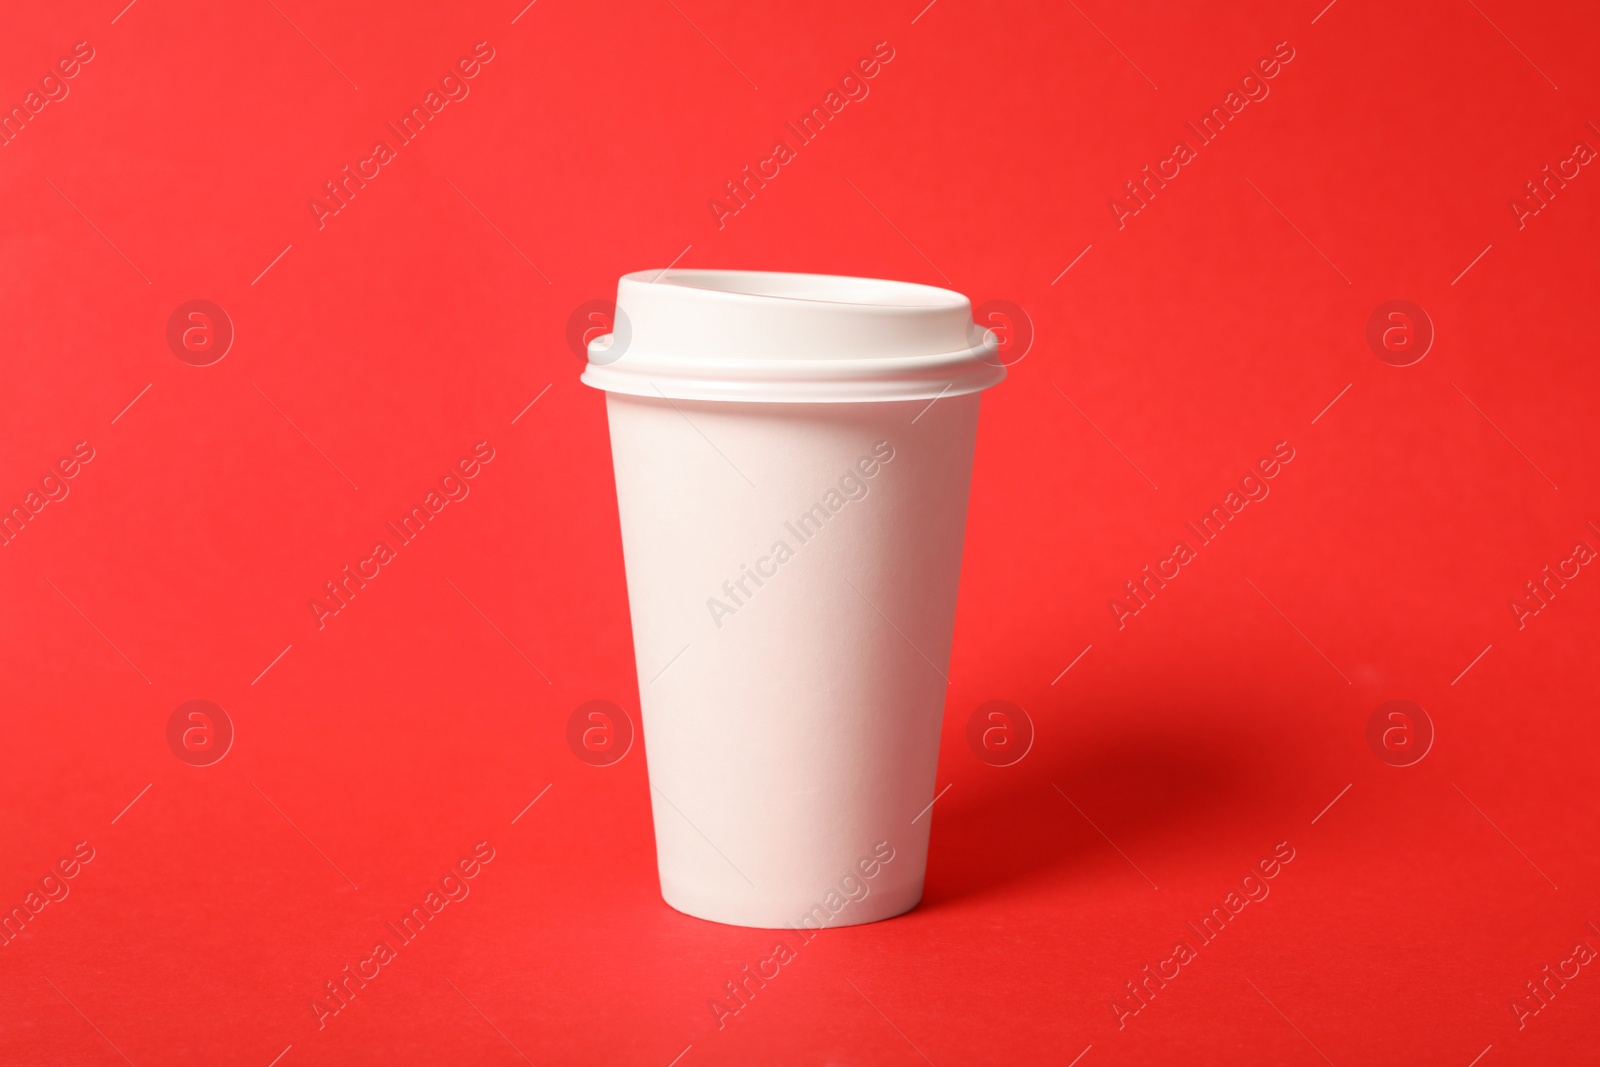 Photo of Takeaway paper coffee cup on red background